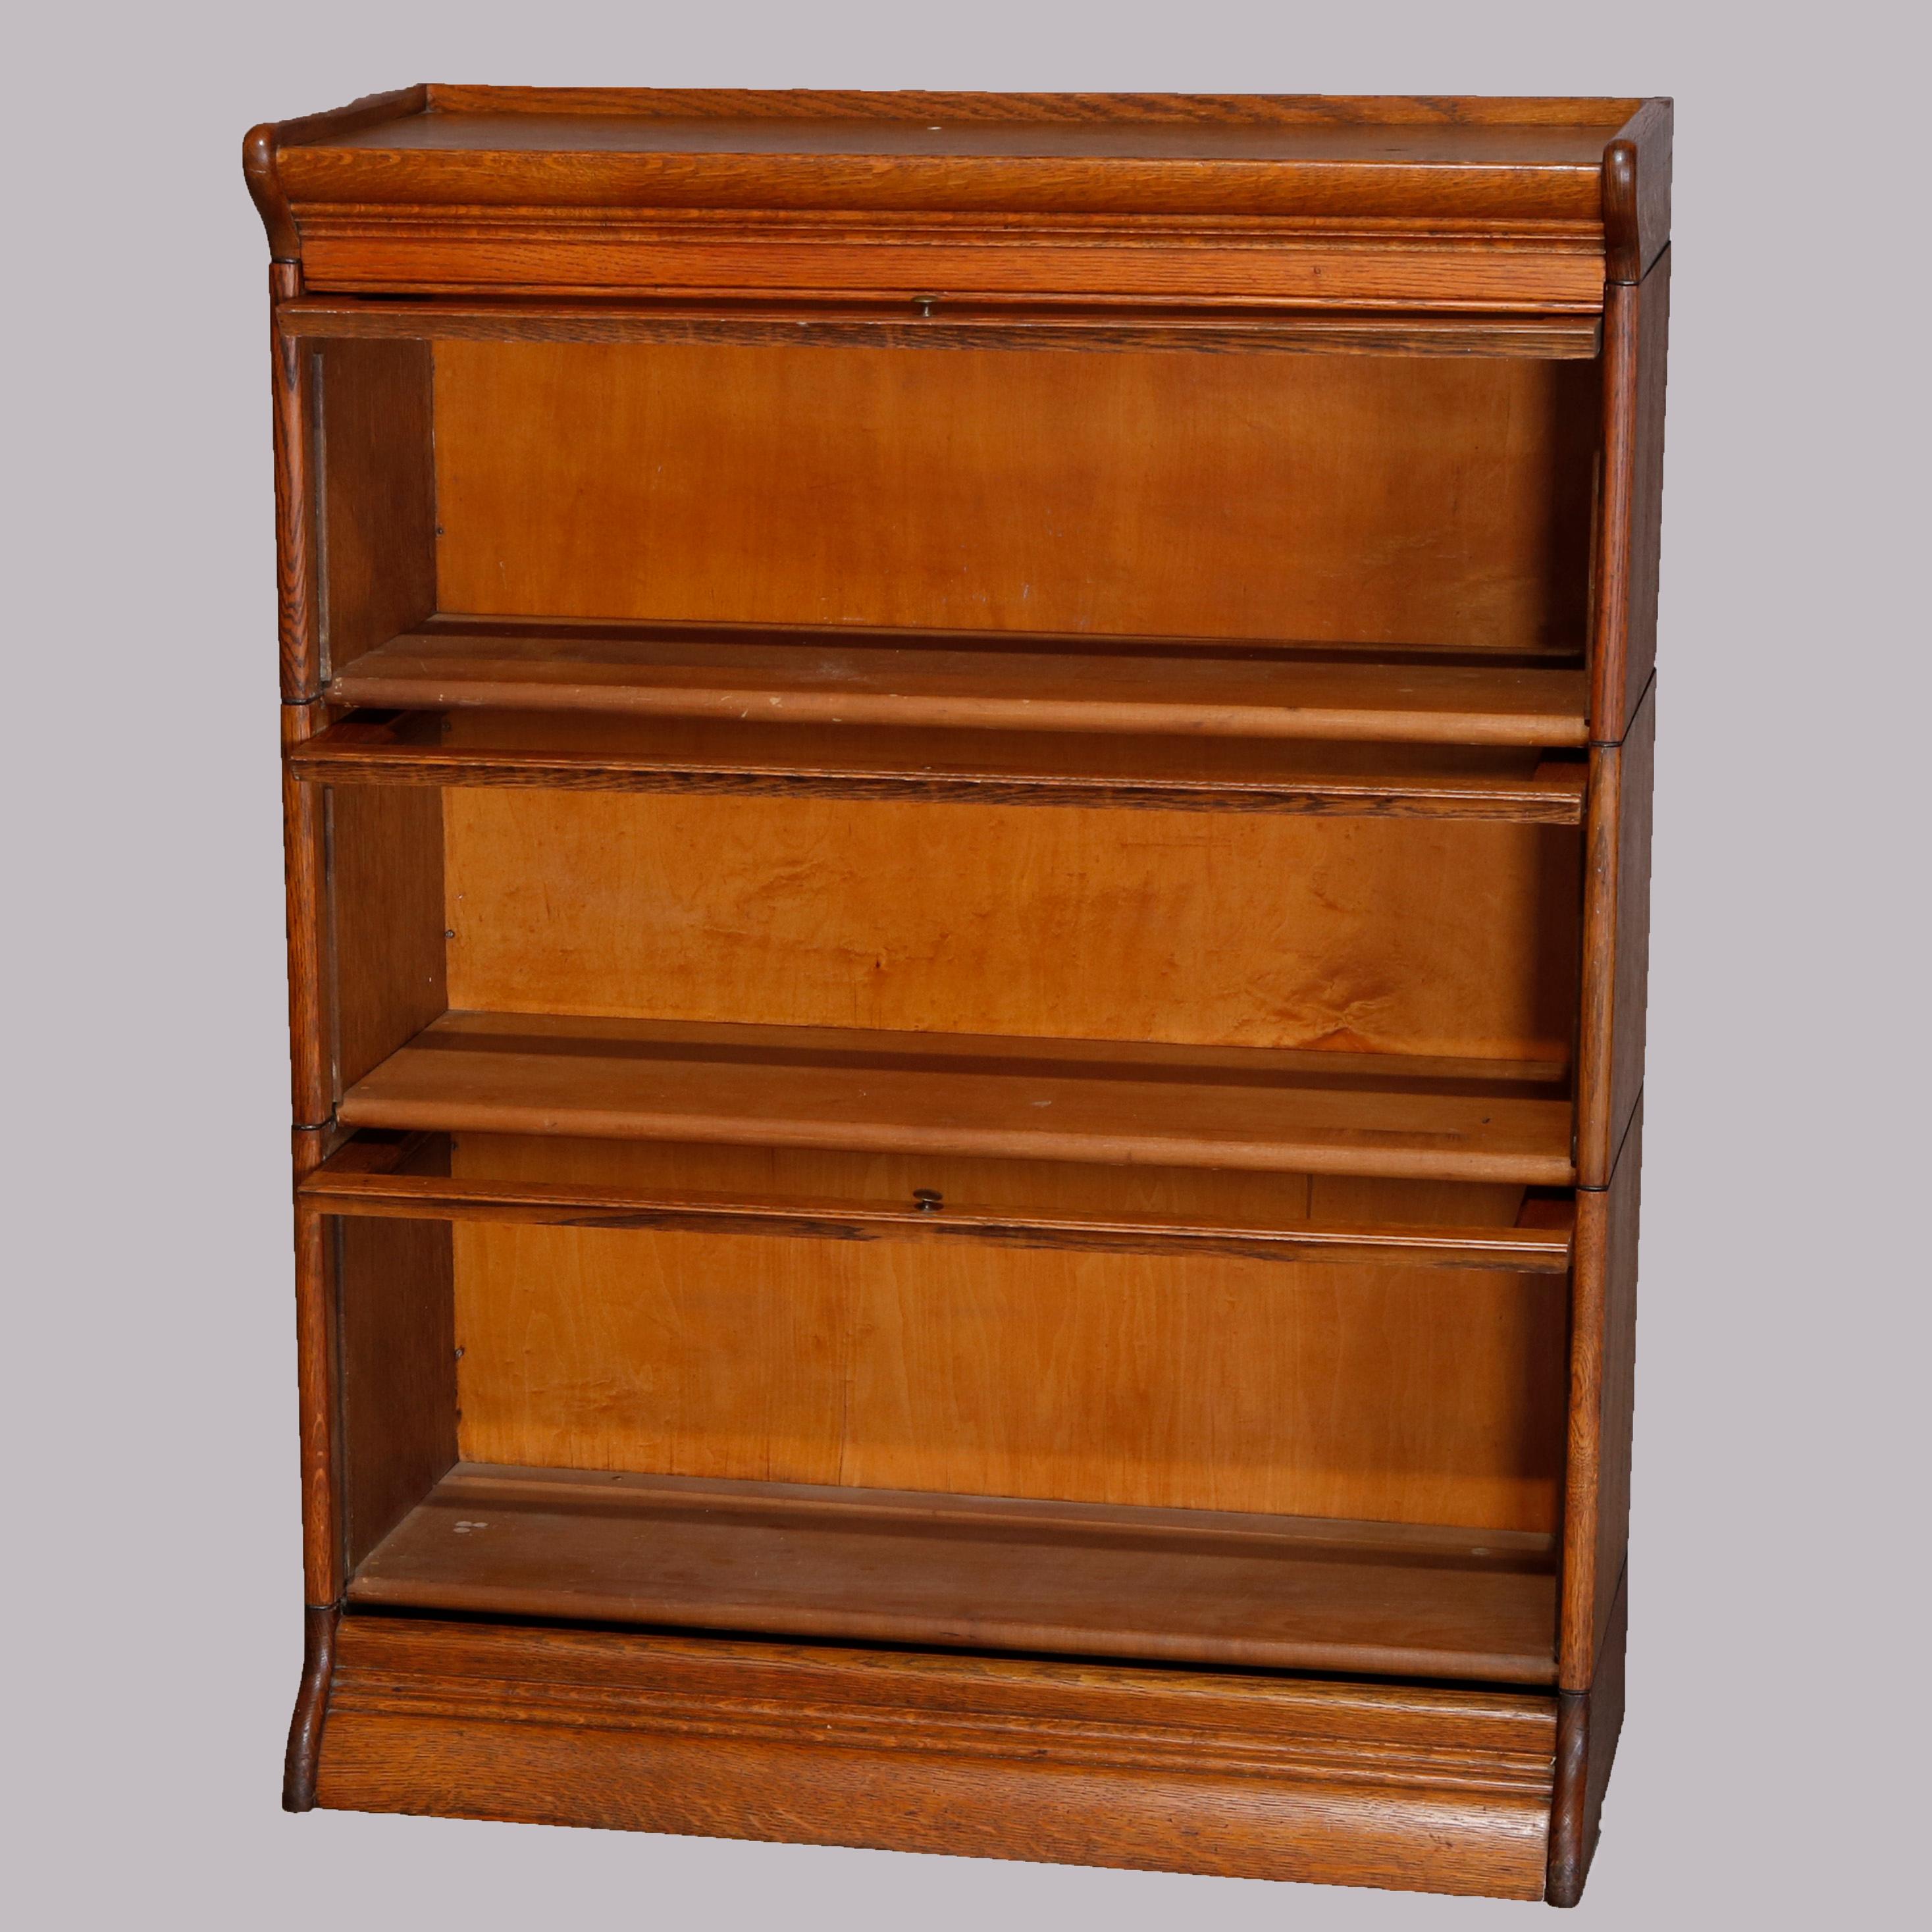 An antique Arts & Crafts mission oak barrister bookcase offers quarter sawn oak construction with three stacks, each having a pull-out glass door, en verso original GRM label as photographed, circa 1910

Measures: 44.5